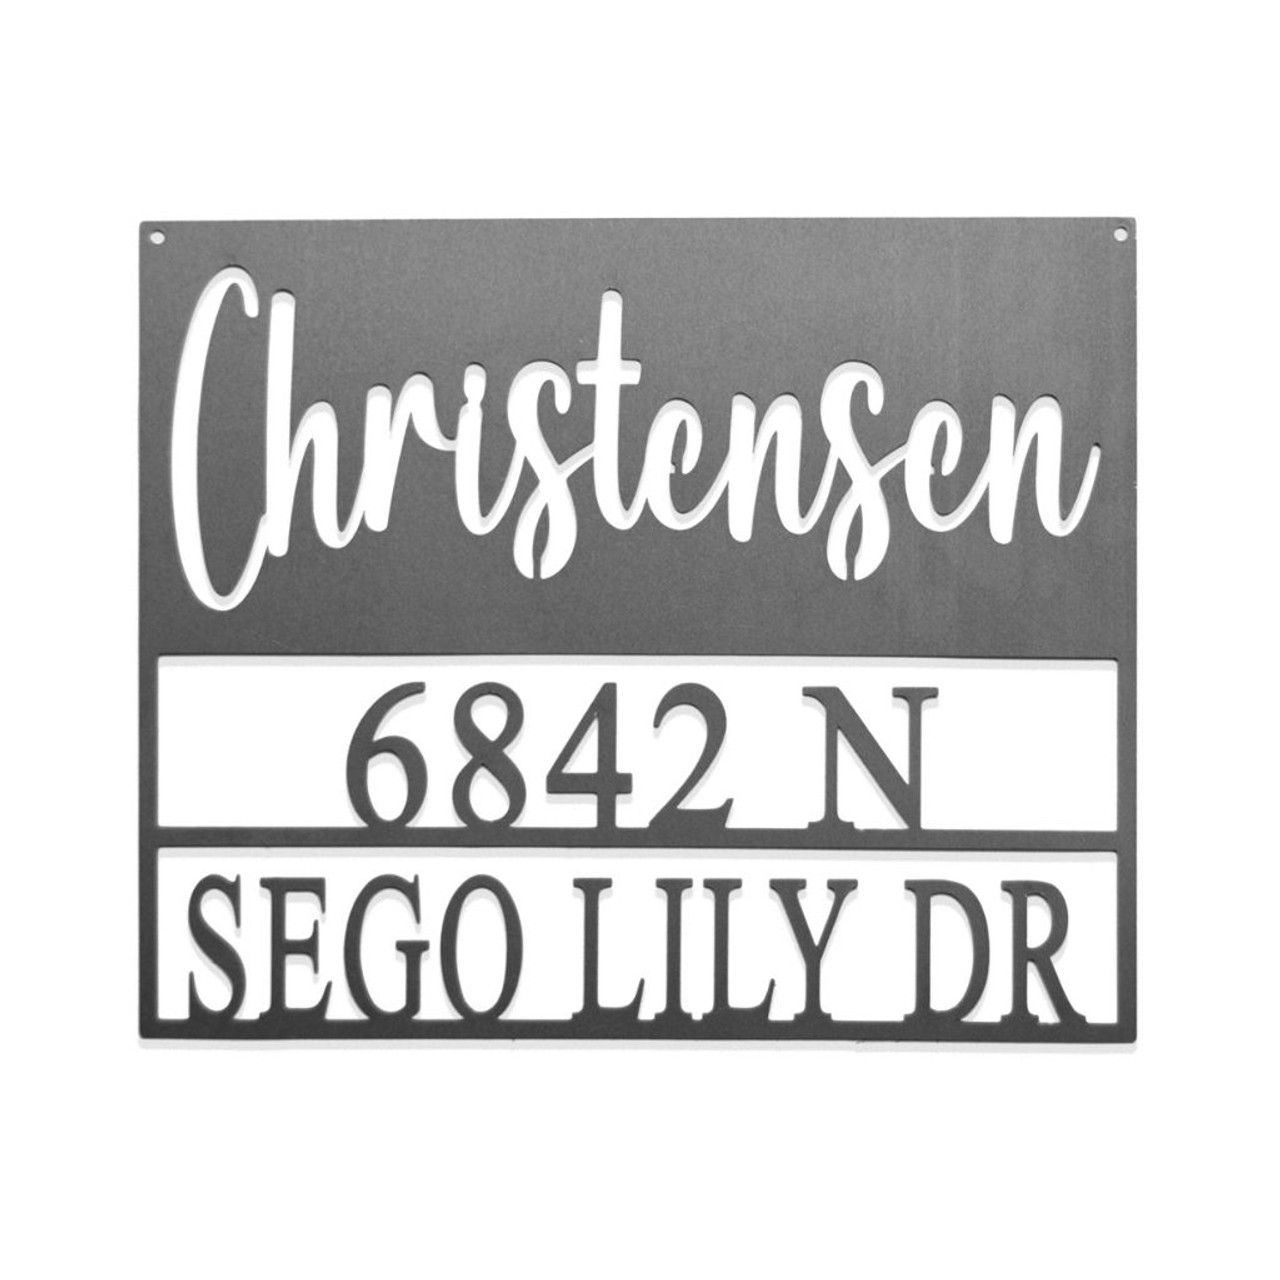 Personalized Name and Address Metal Sign Plaque product image